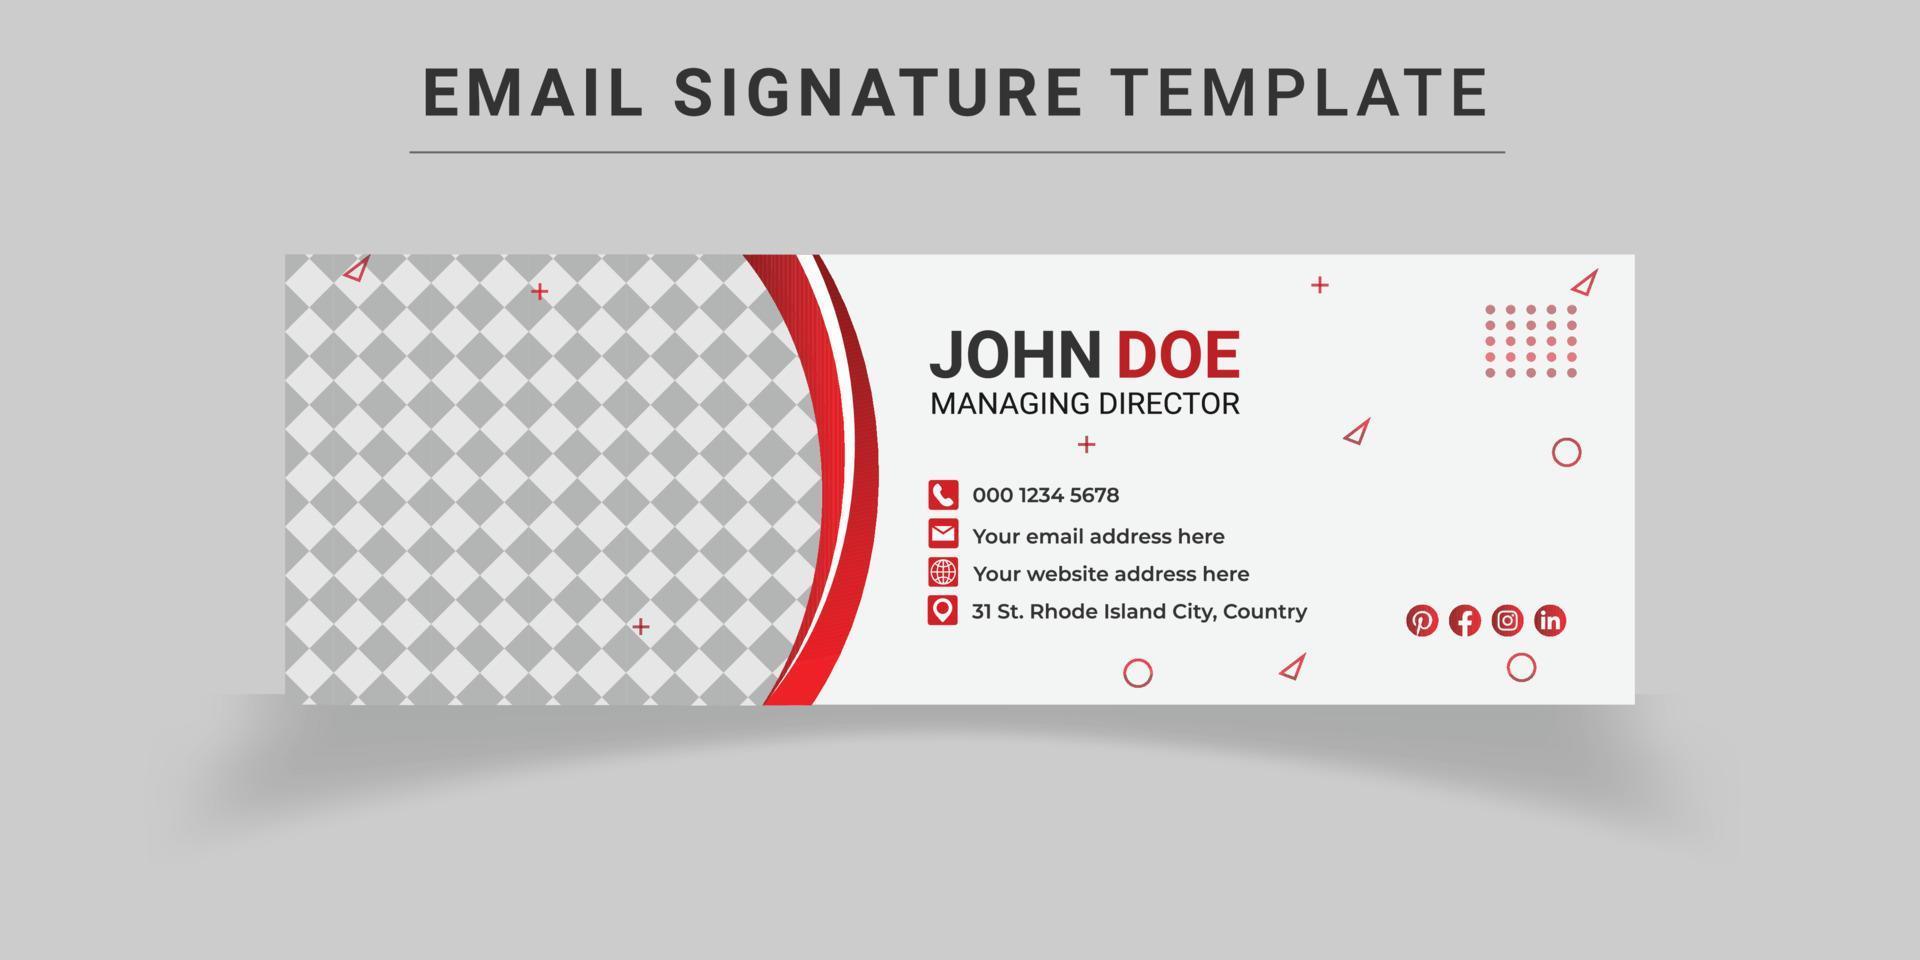 Email Signature Templates vector